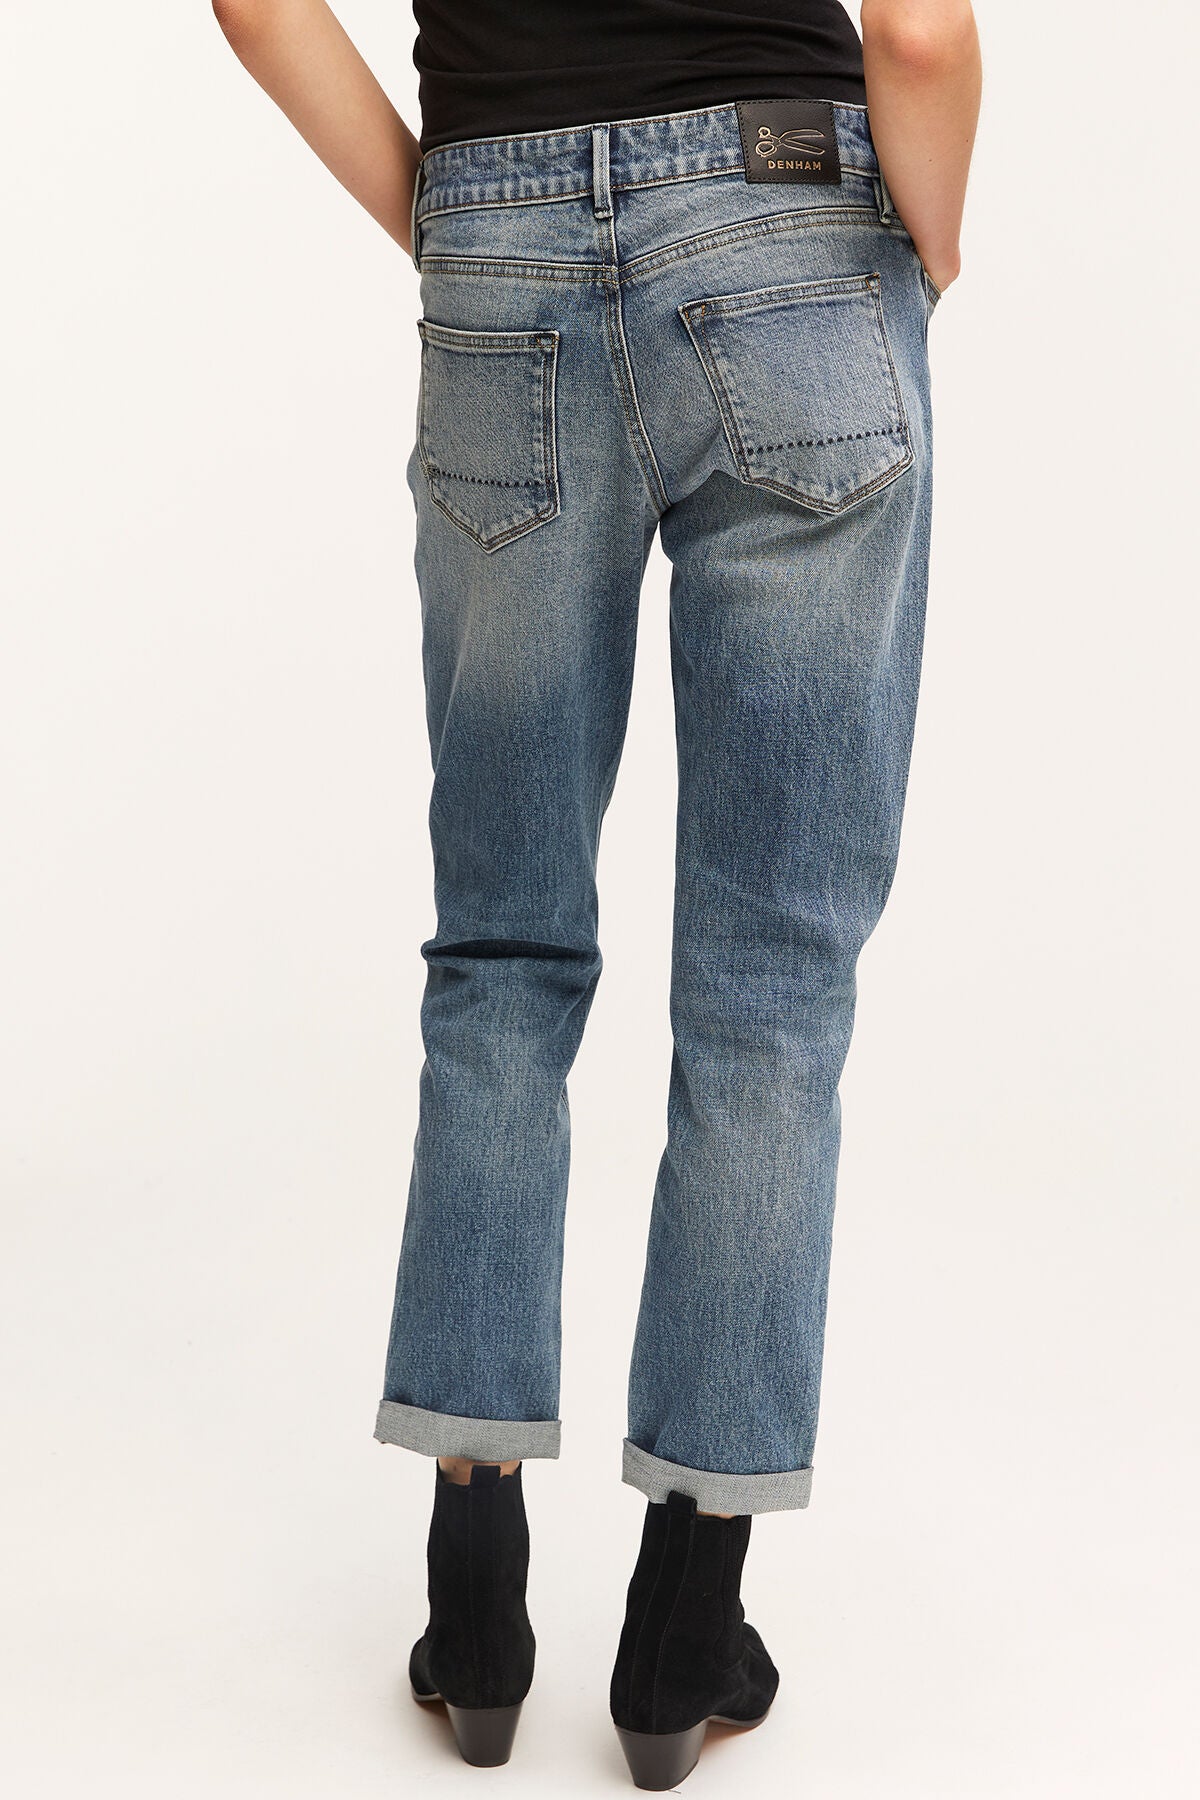 The back view of a woman wearing a pair of MONROE Girlfriend - Vintage Indigo Wash jeans made from GOTS-certified organic cotton with a vintage inspired wash by Denham.